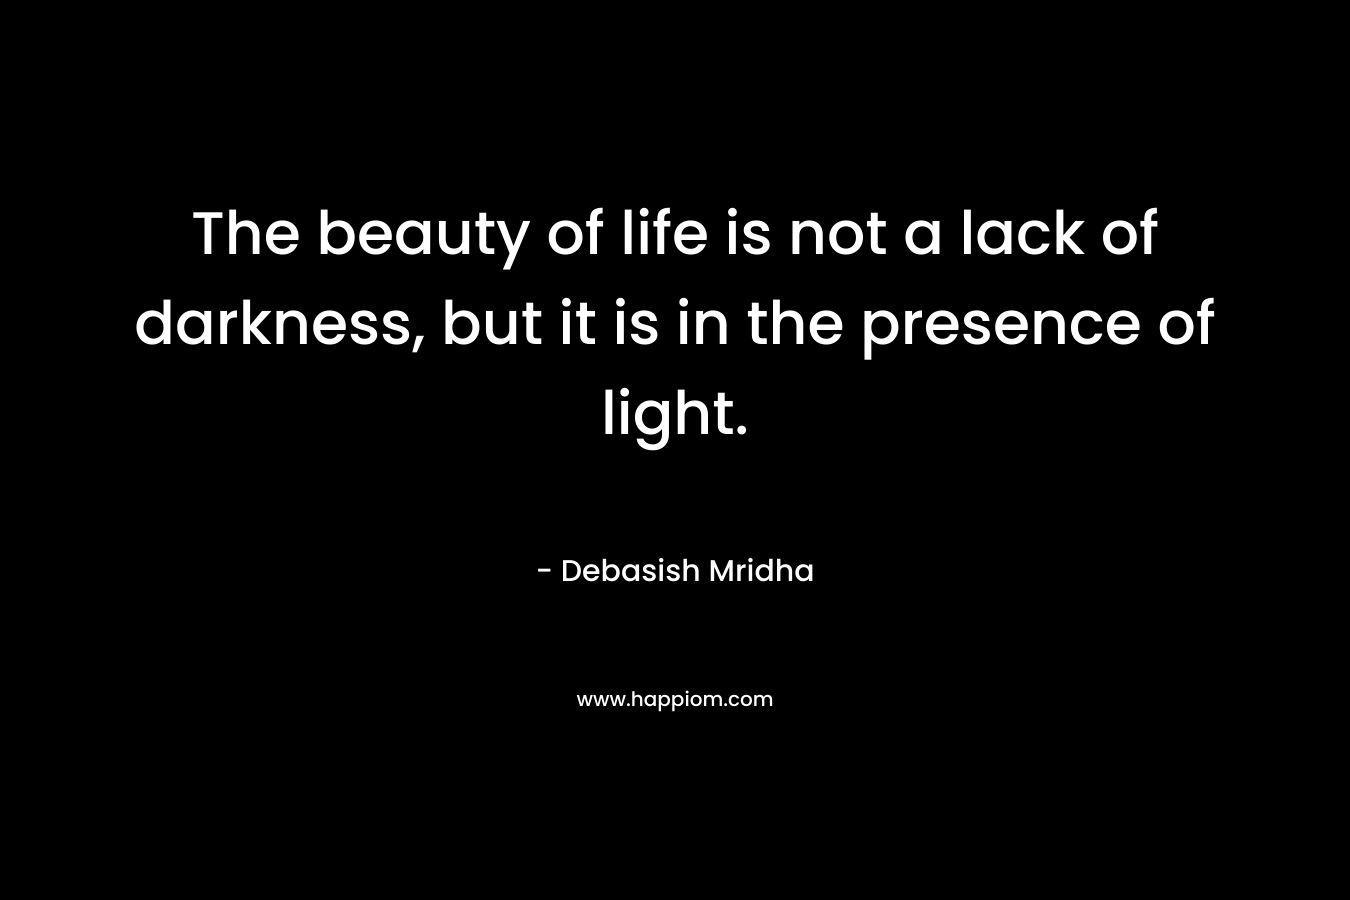 The beauty of life is not a lack of darkness, but it is in the presence of light. – Debasish Mridha